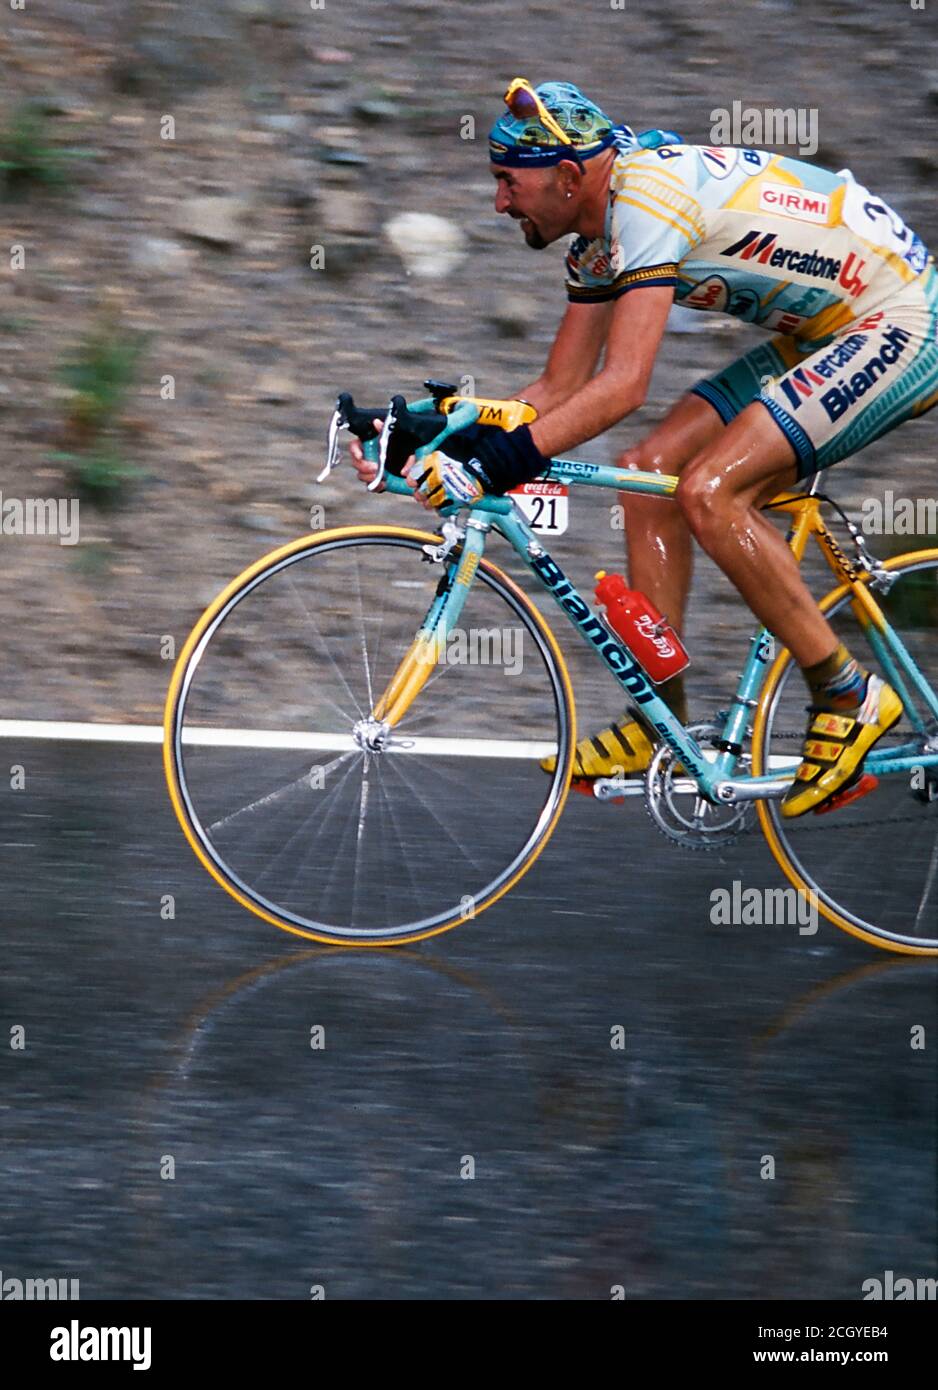 Marco Pantani, Mercatone Uno, on his way to winning stage 15 of the 1998 Tour de France and the yellow jersey. Stock Photo